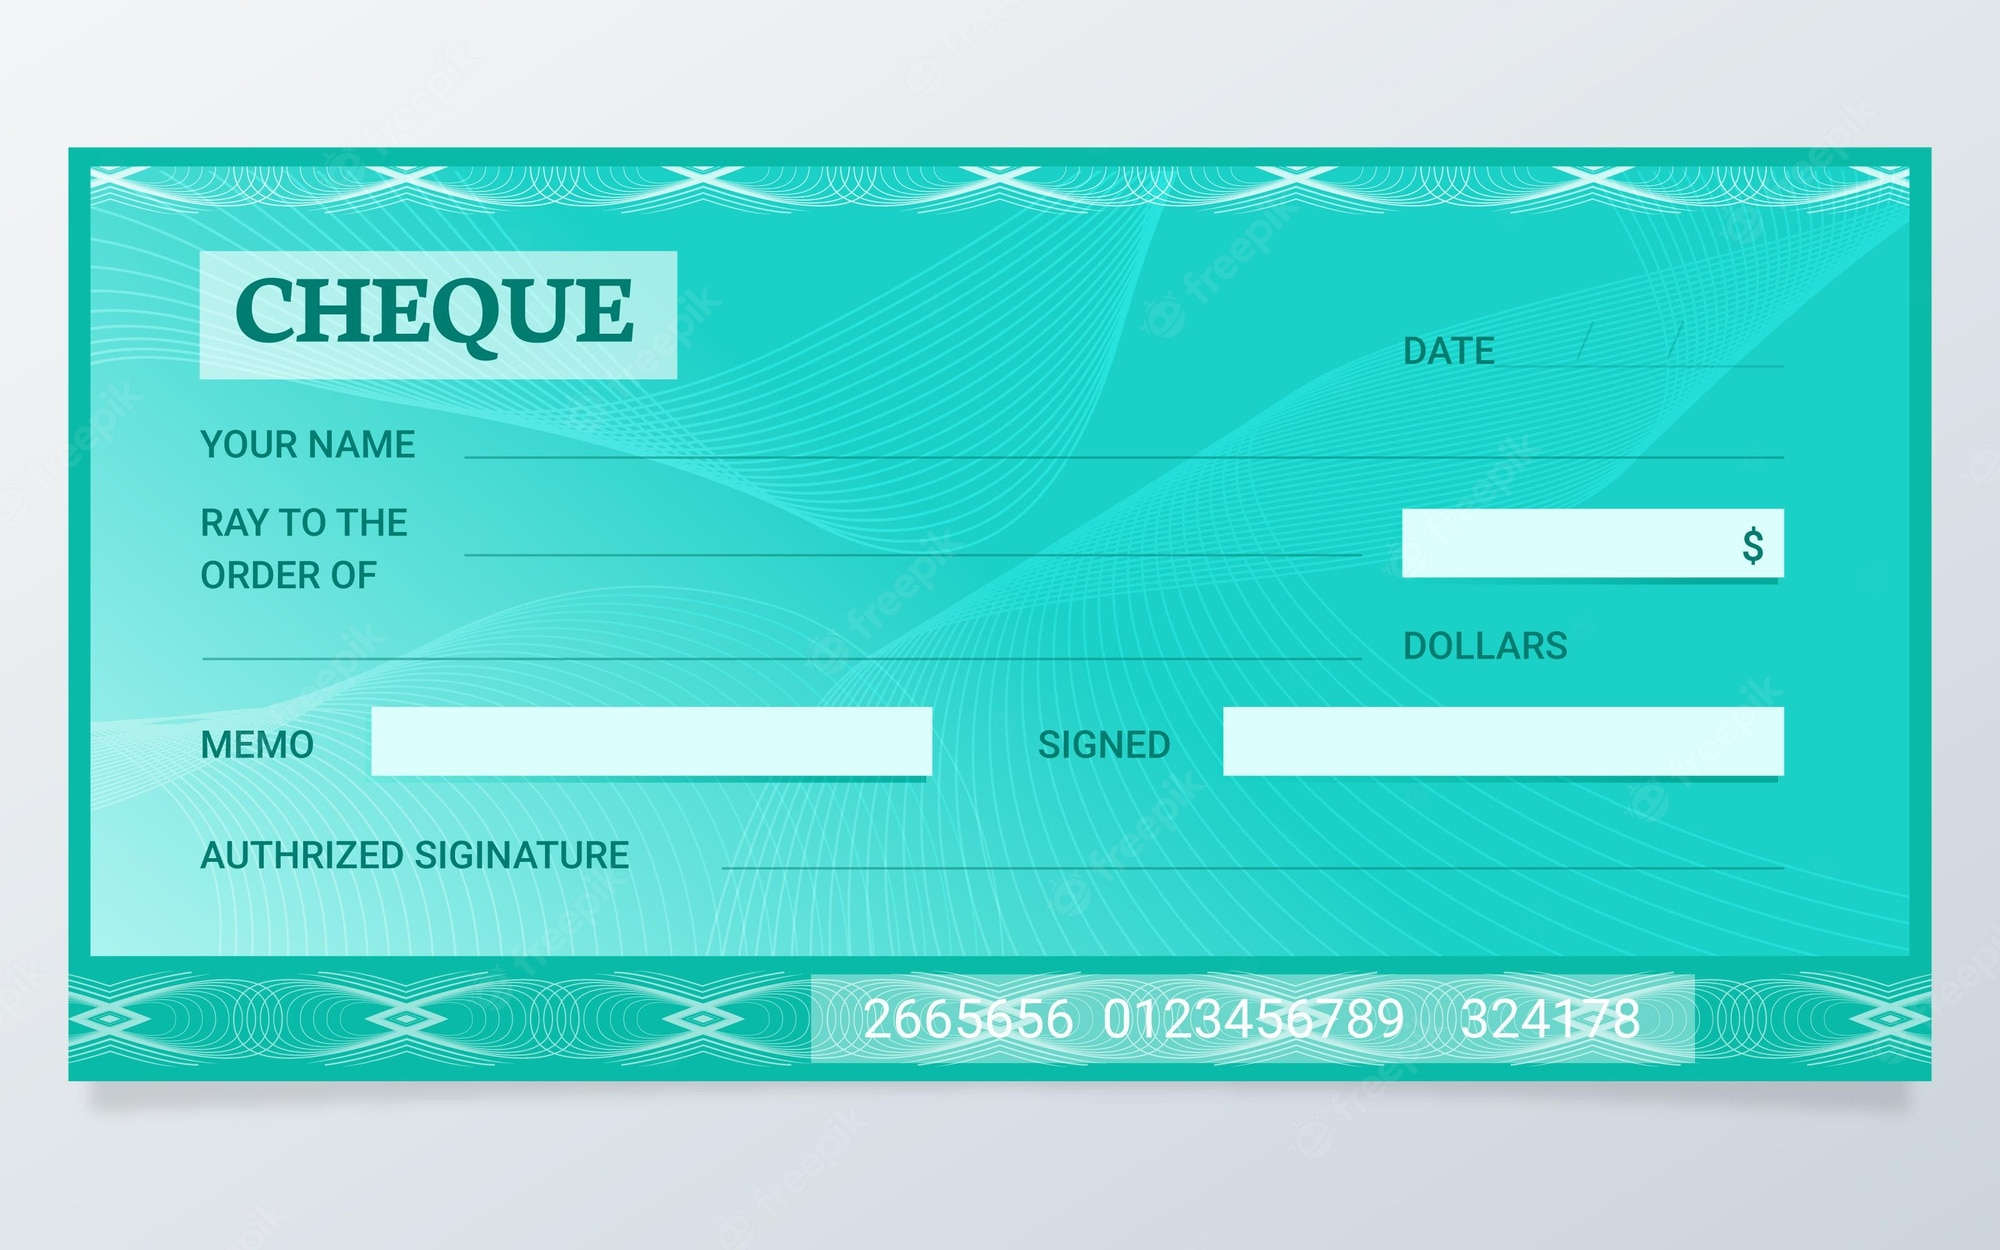 Blank check template Vectors & Illustrations for Free Download  Throughout Customizable Blank Check Template